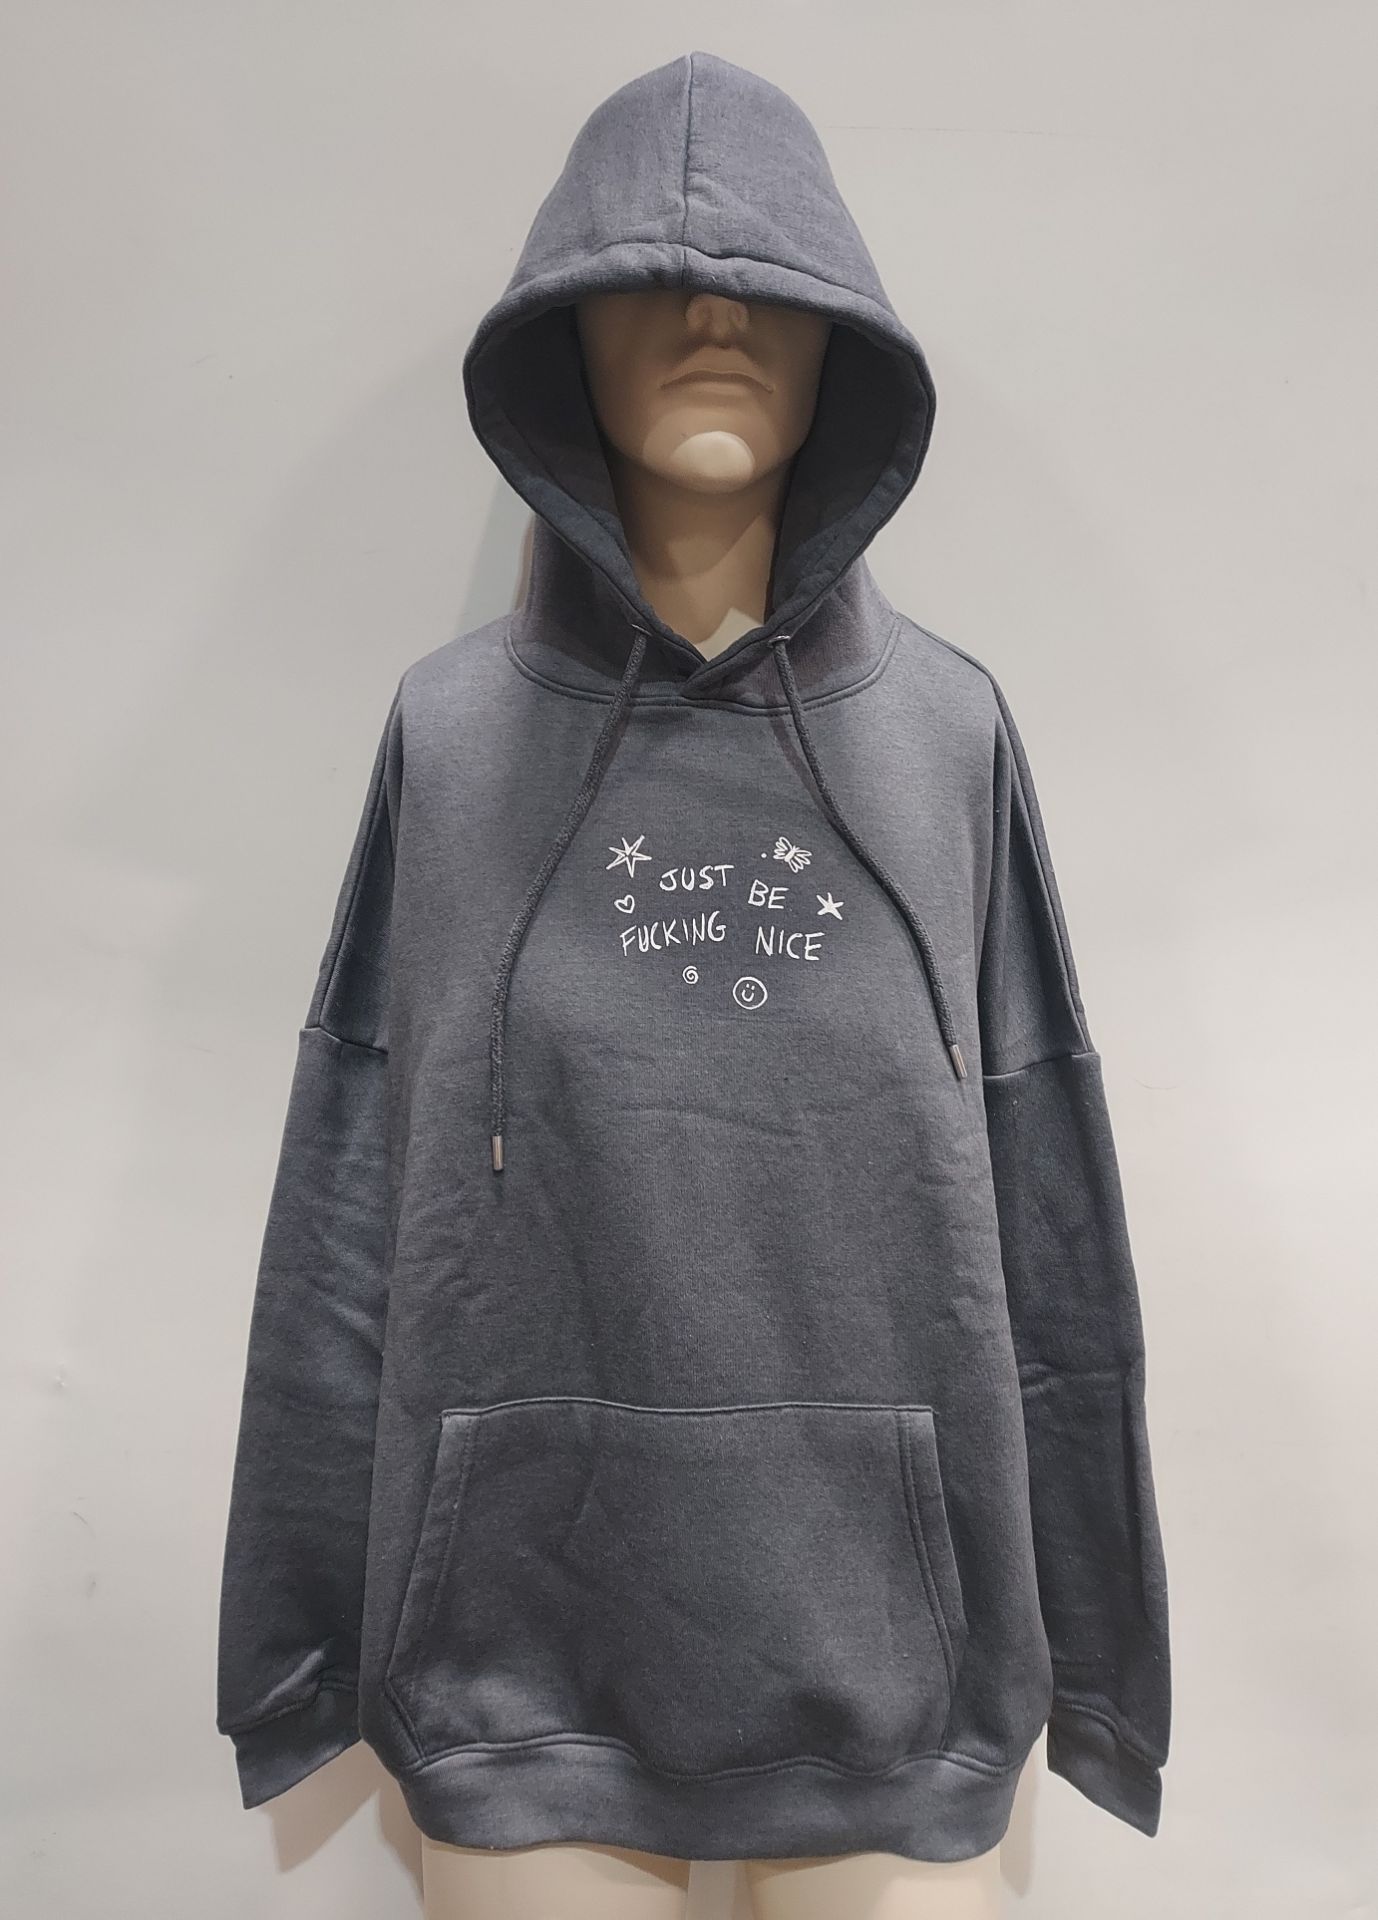 20 X BRAND NEW DAISY STREET HOODIES WITH JUST BE F#@#ING NICE IN CHARCOAL IN SIZE MEDIUM IN TWO